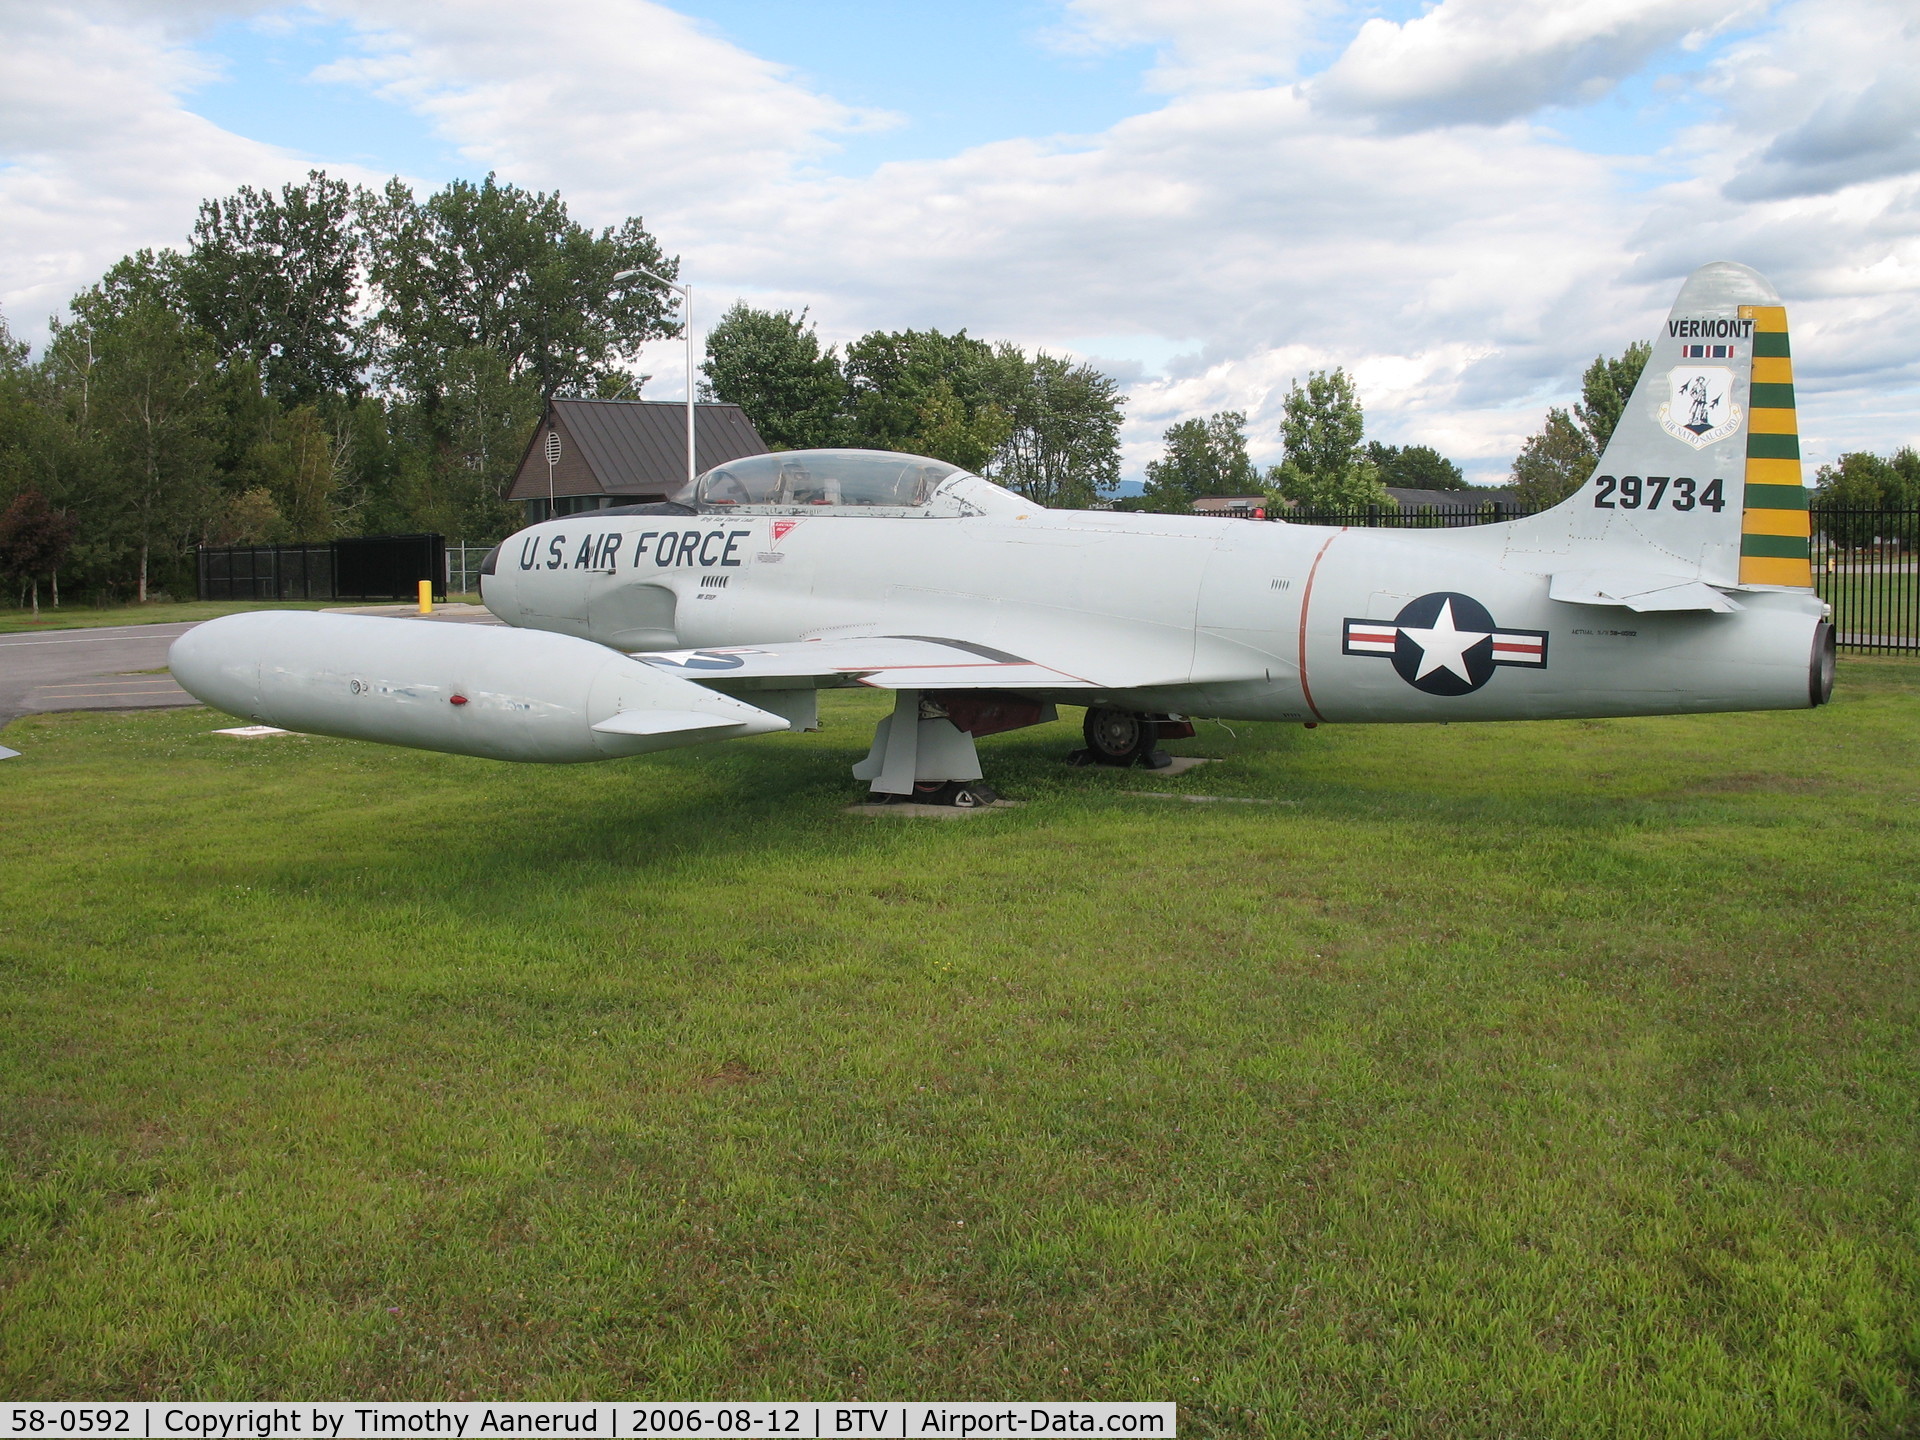 58-0592, 1958 Lockheed T-33A Shooting Star C/N 580-1561, Lockheed T-33A, Vermont ANG.  Serial number displayed is not the actual serial number.